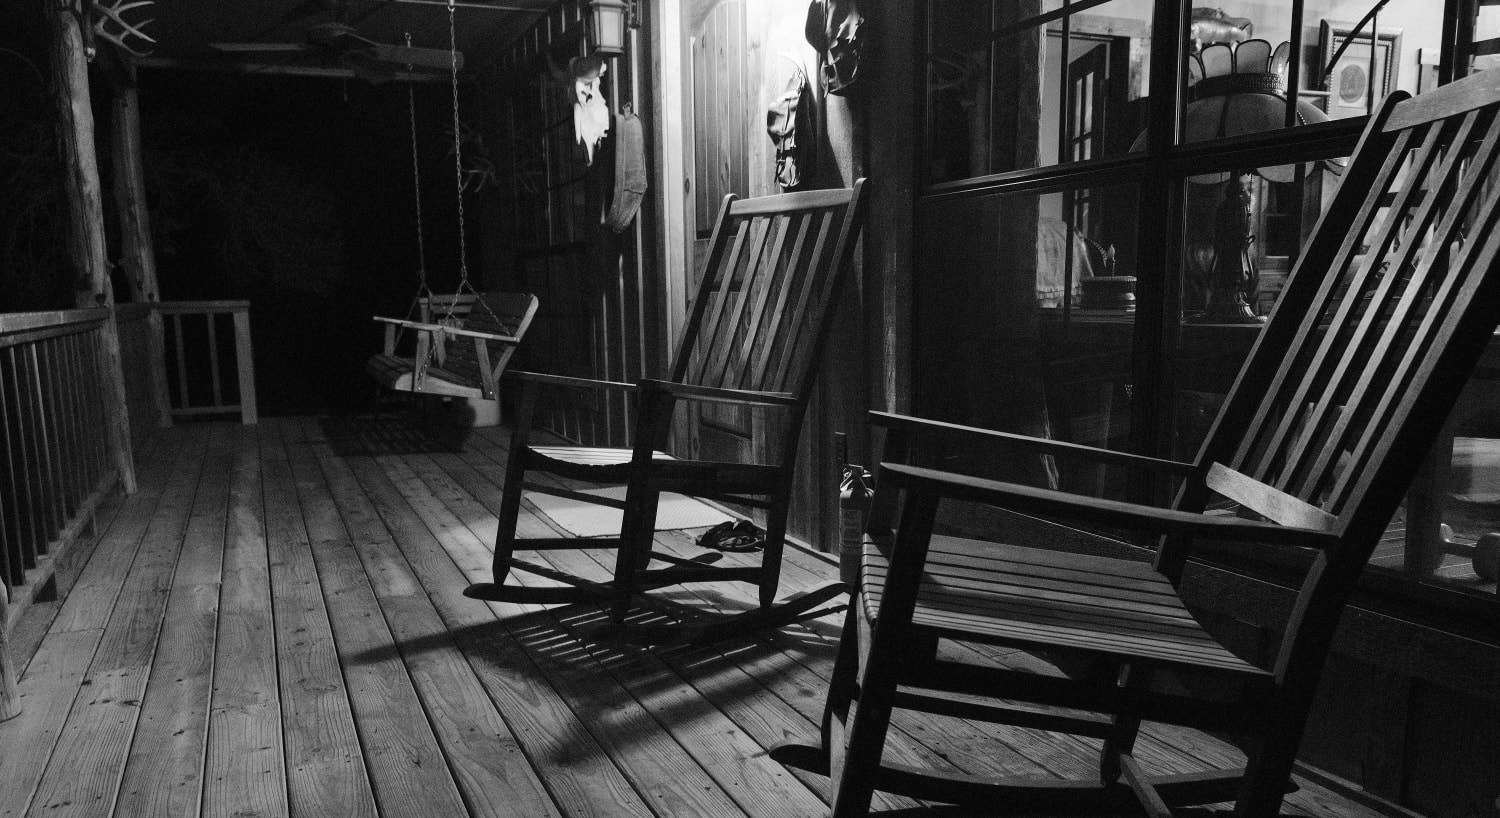 Large wooden front porch with wooden rocking chairs and swing at night